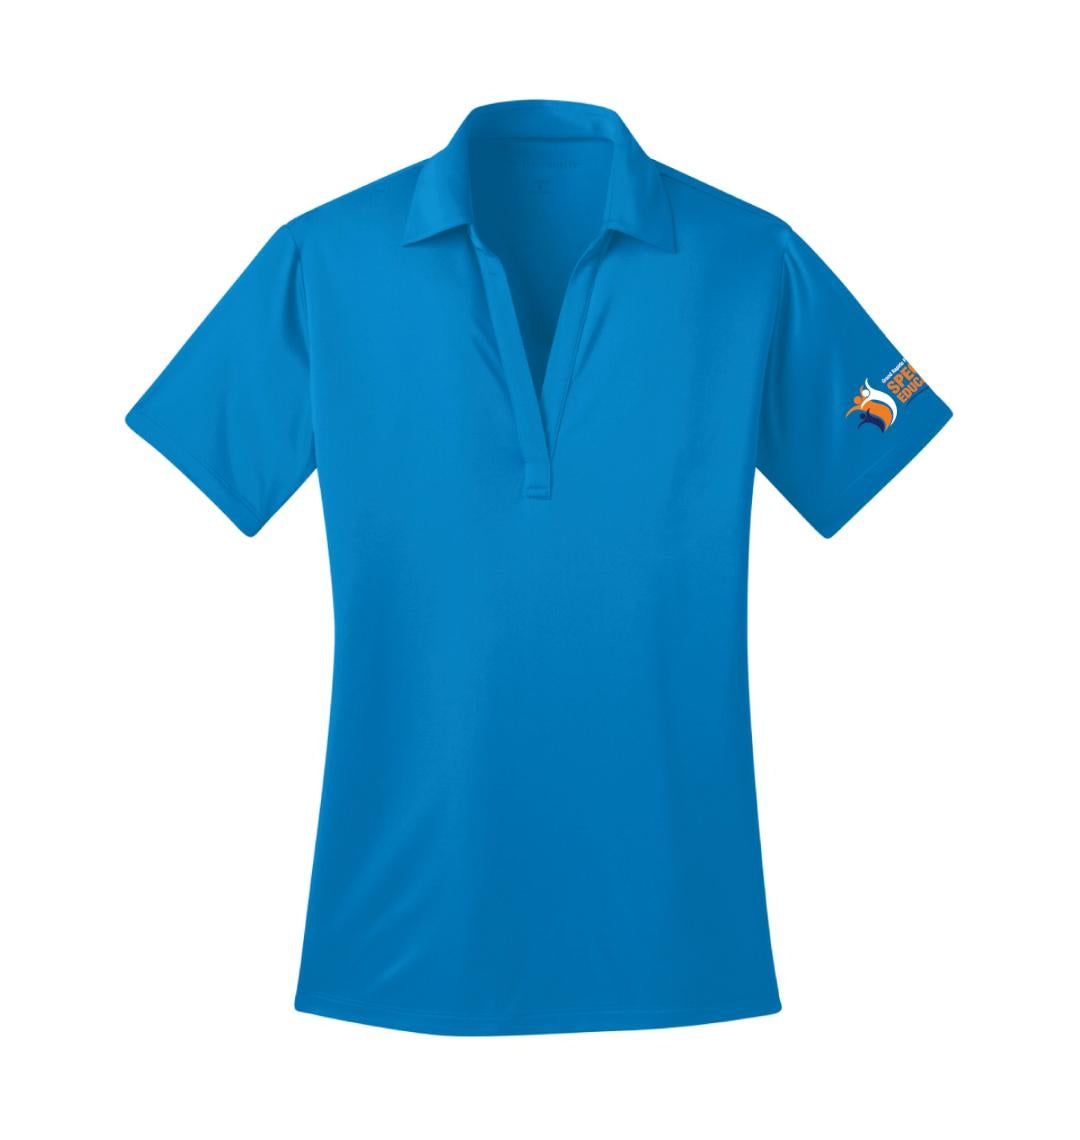 GRPS SPECIAL EDU. Women’s Silk Touch™ Performance Polo